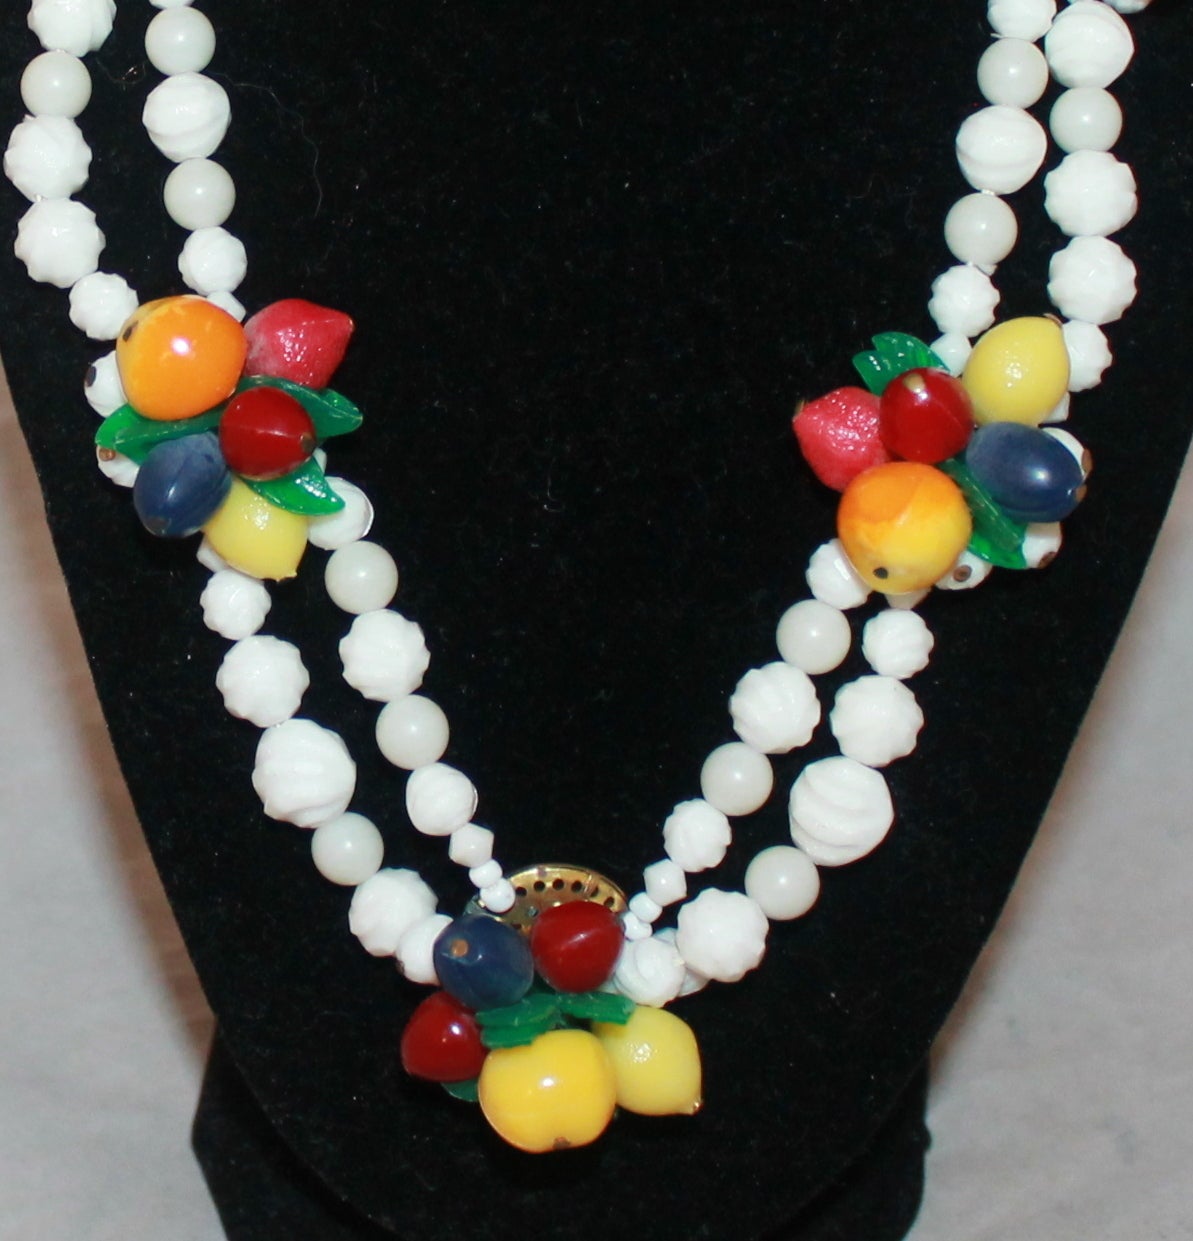 1950's Rare Vintage West German Fruit Beaded Necklace. This necklace is in excellent vintage condition with wear consistent with its age. It has a hook clasp and is signed W.Germany on that area. 

Measurements:
Length- 16.5-19